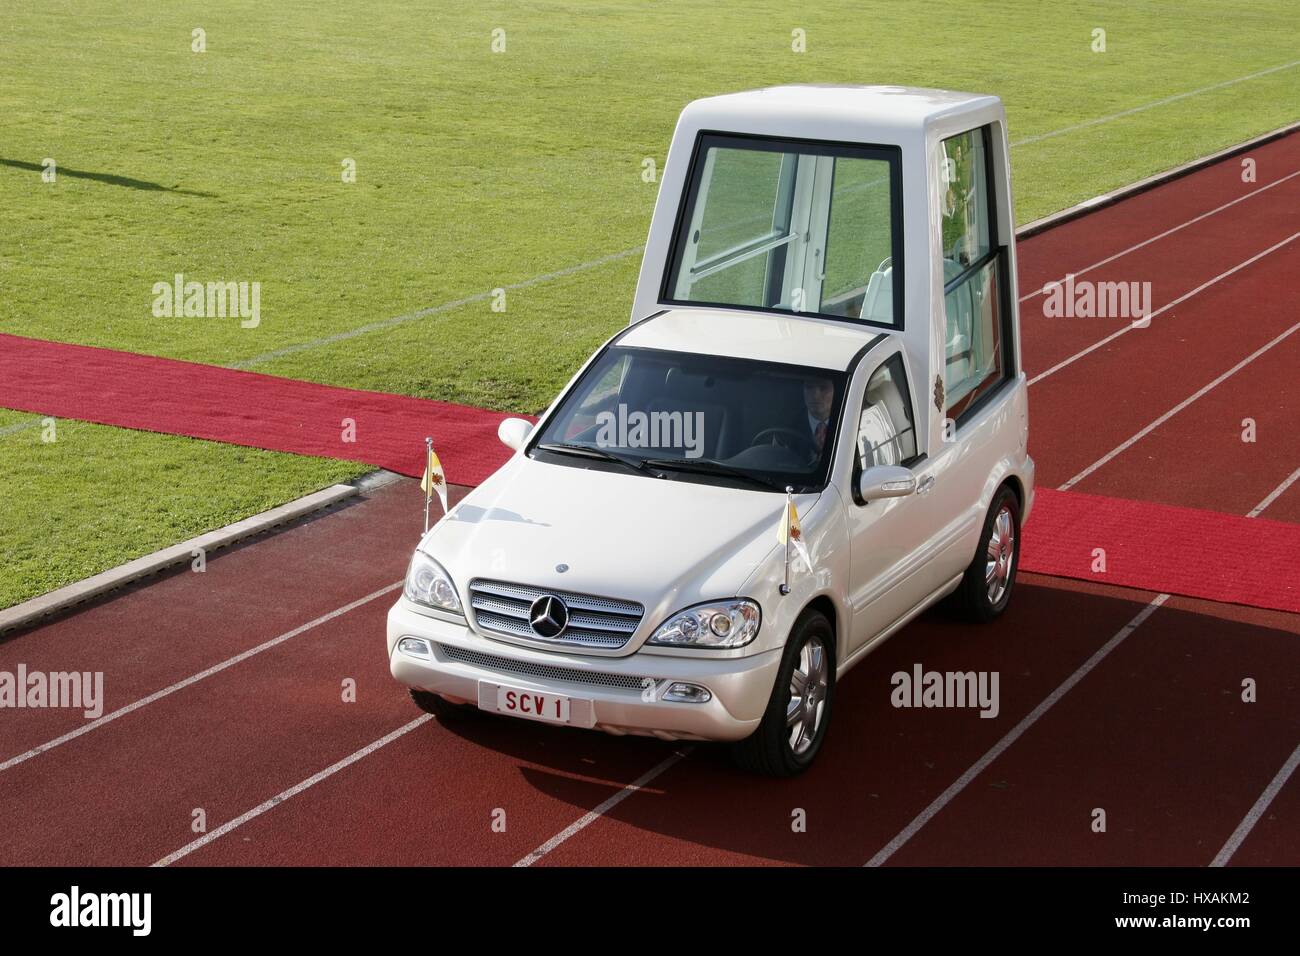 POPE MOBILE THE POPE CAR 11 September 2006 ALTOTTING GERMANY Stock Photo